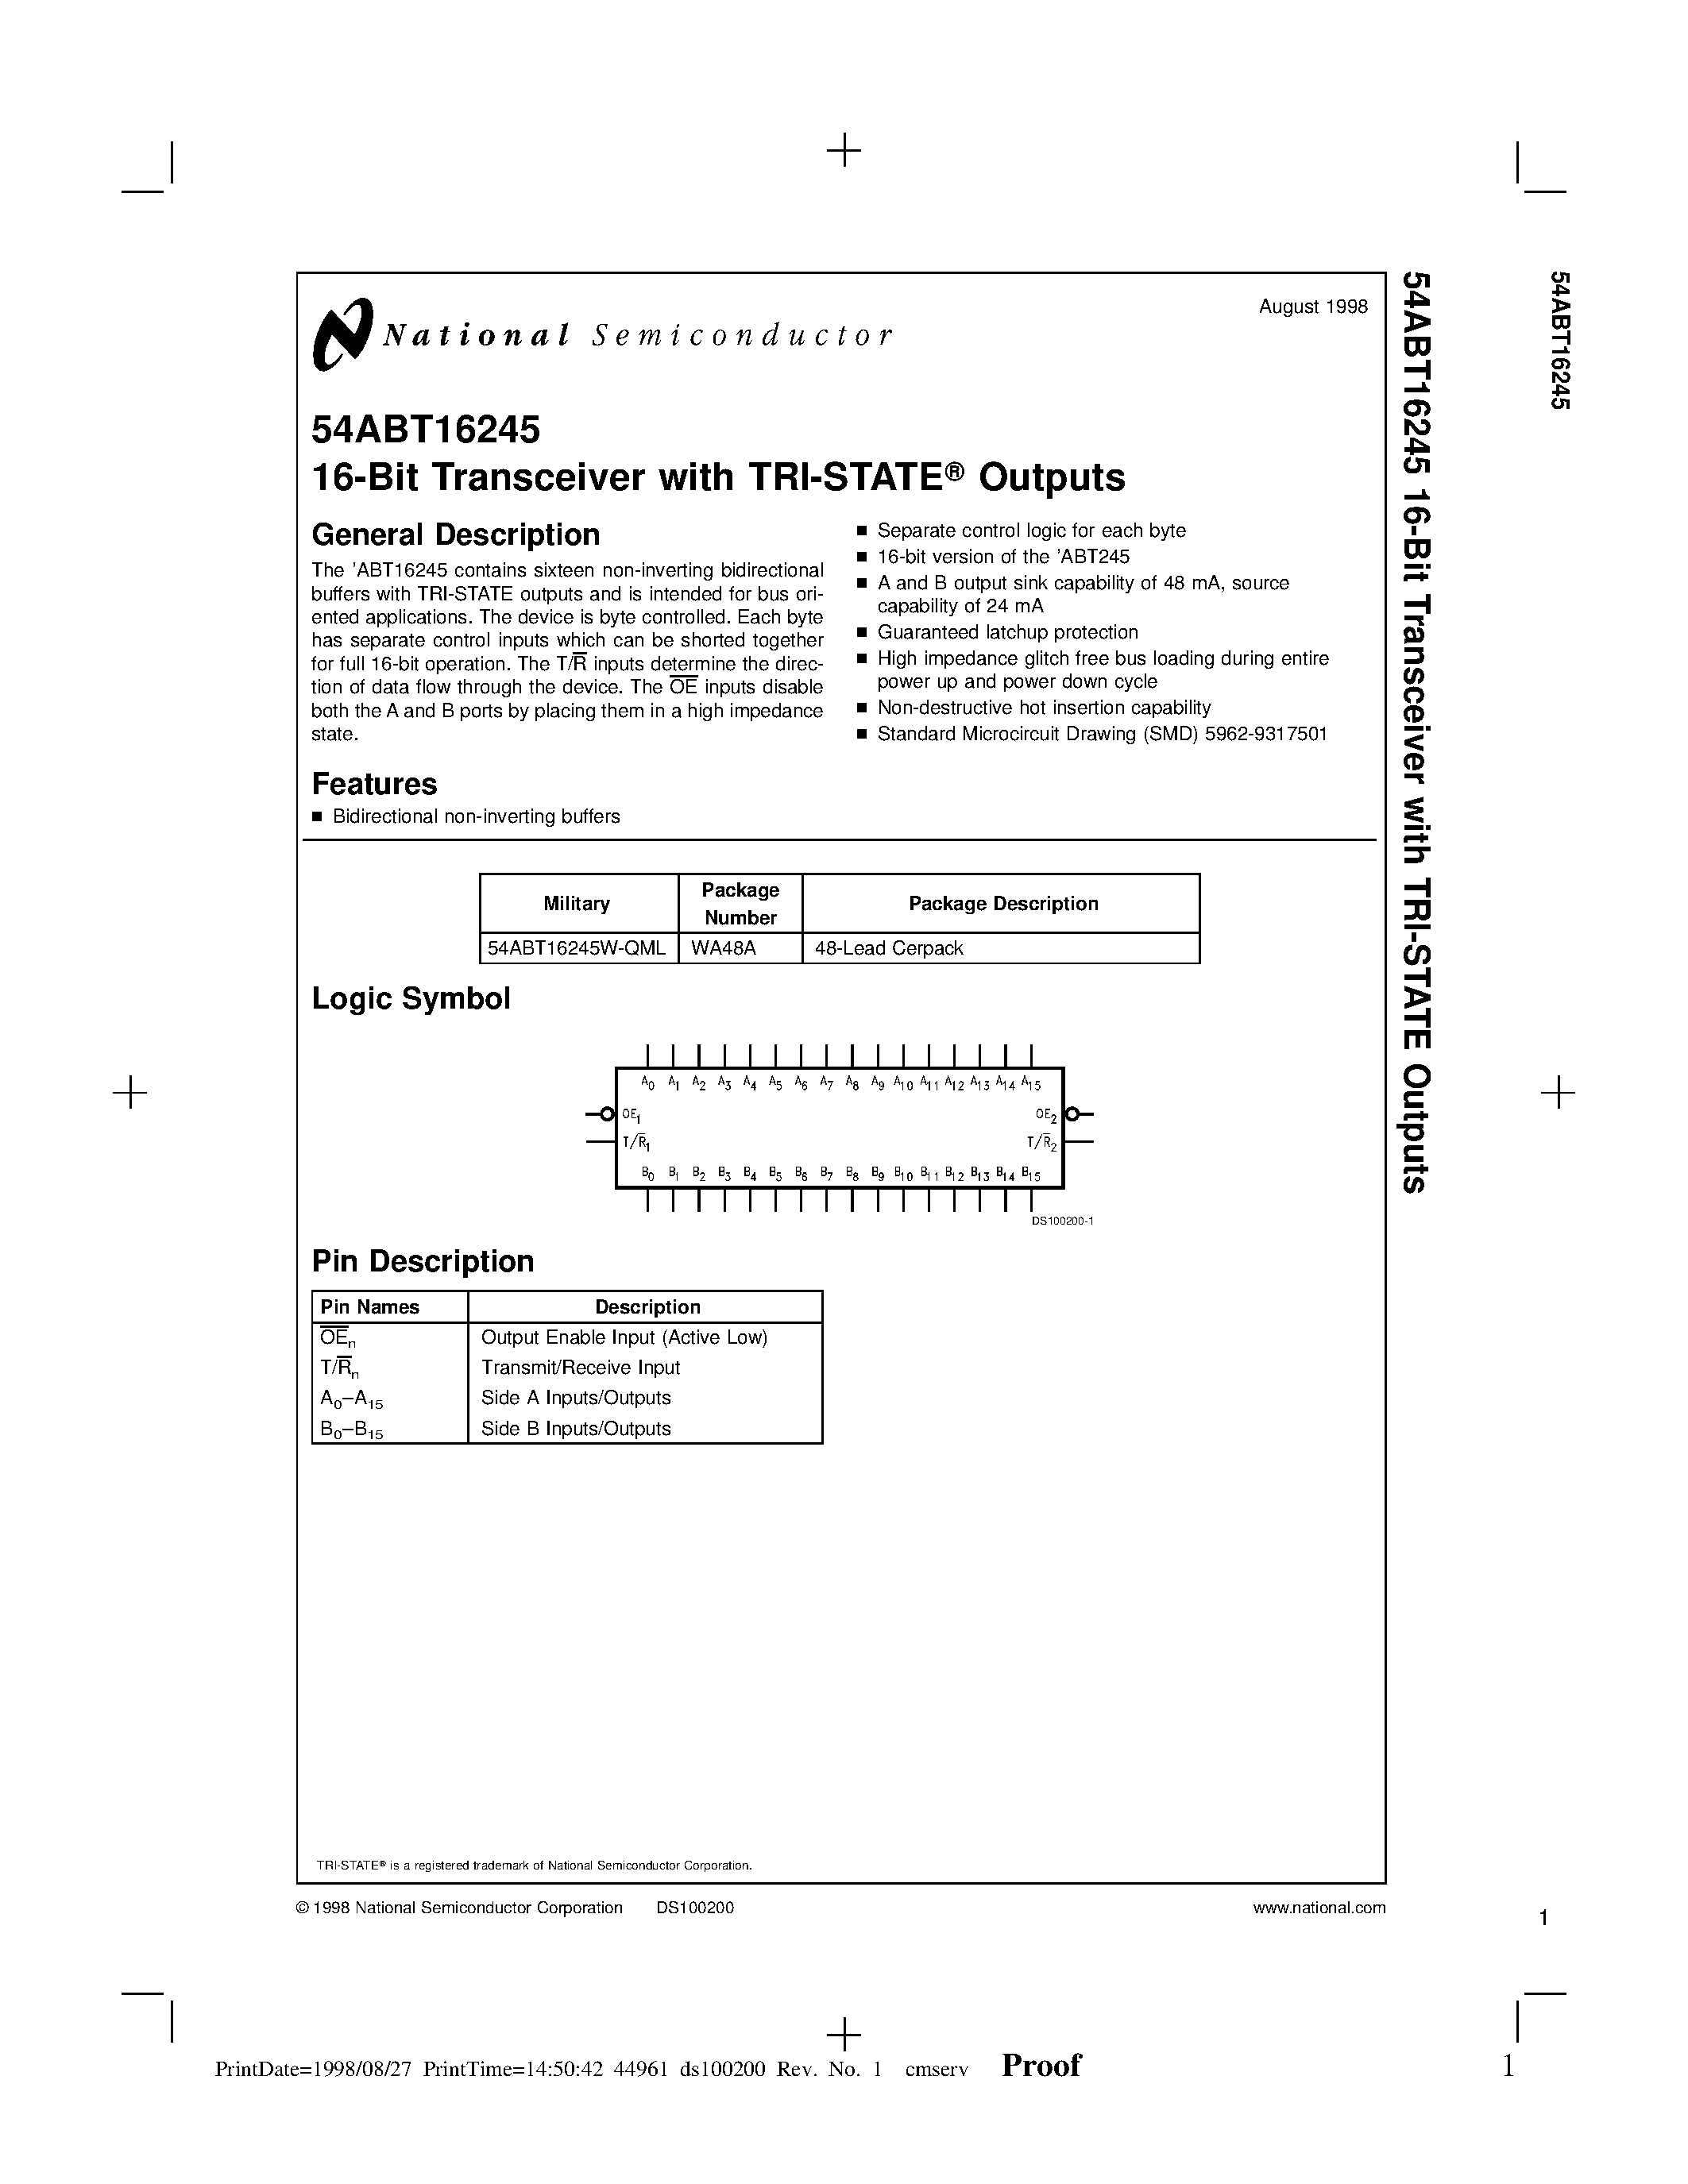 Datasheet 54ABT16245 - 16-Bit Transceiver with TRI-STATE Outputs page 1